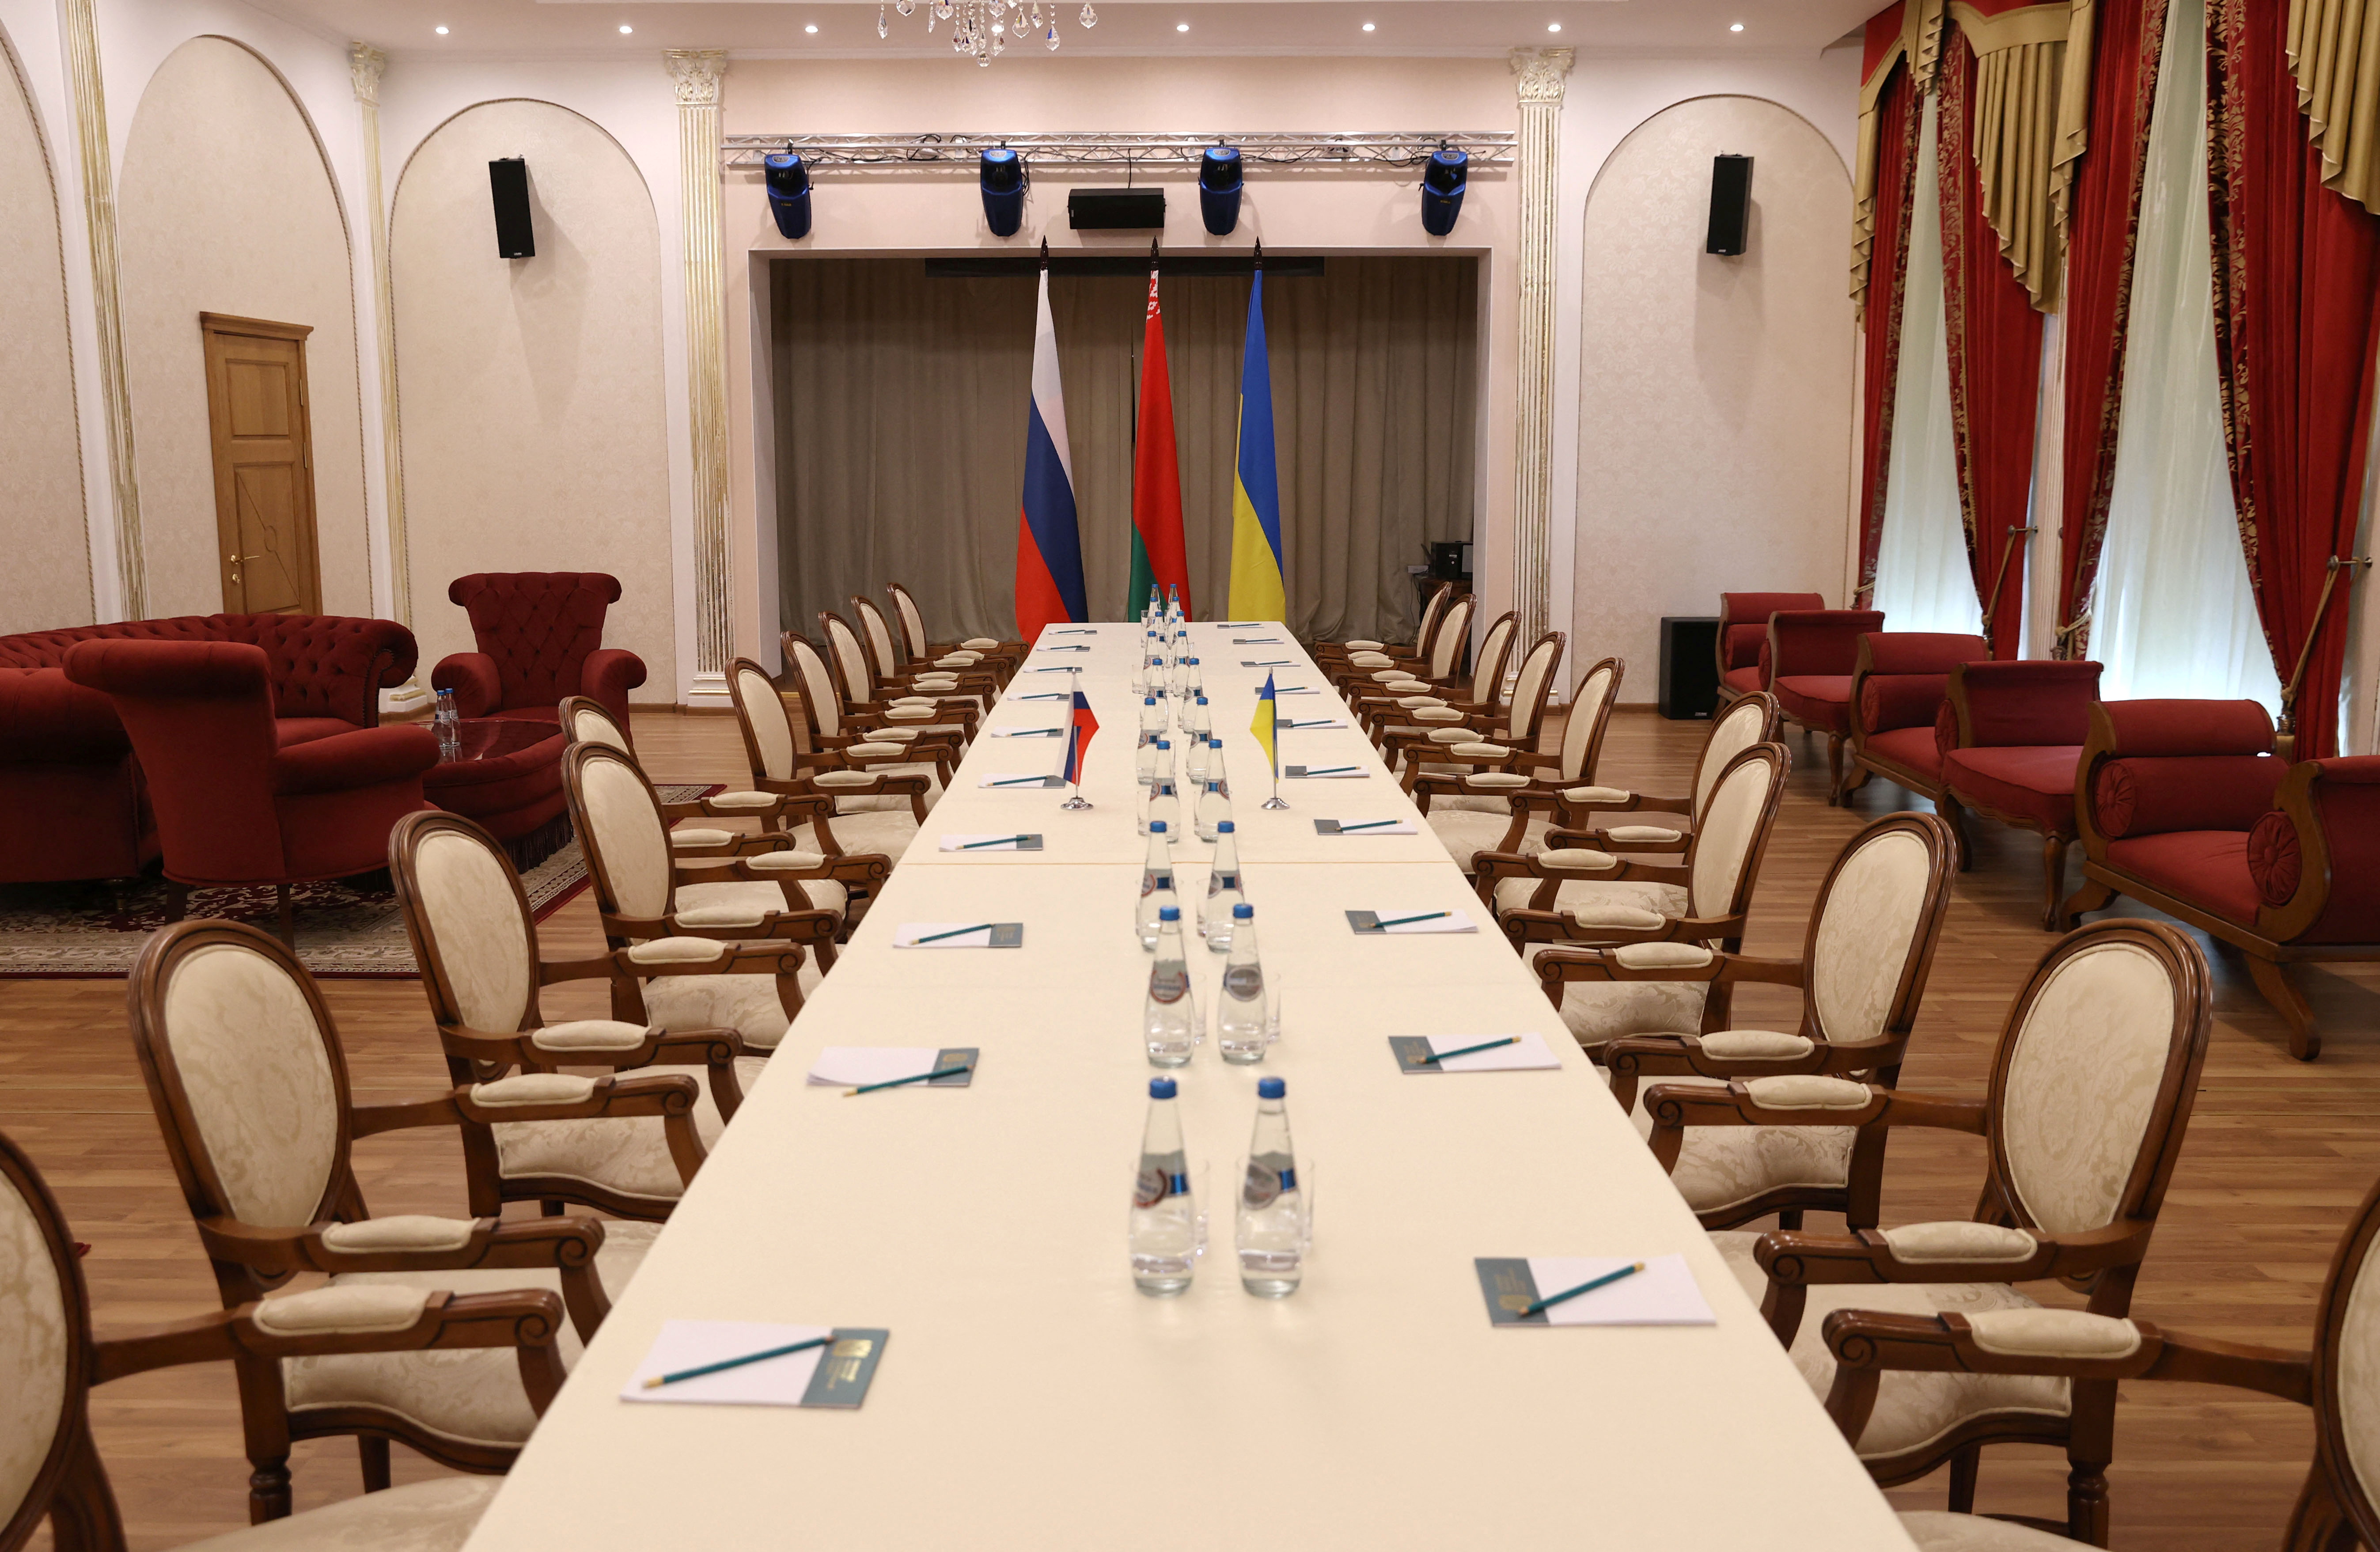 The venue of the forthcoming talks between Russian and Ukrainian delegations is seen, in Rumyantsev-Paskevich Residence in Gomel